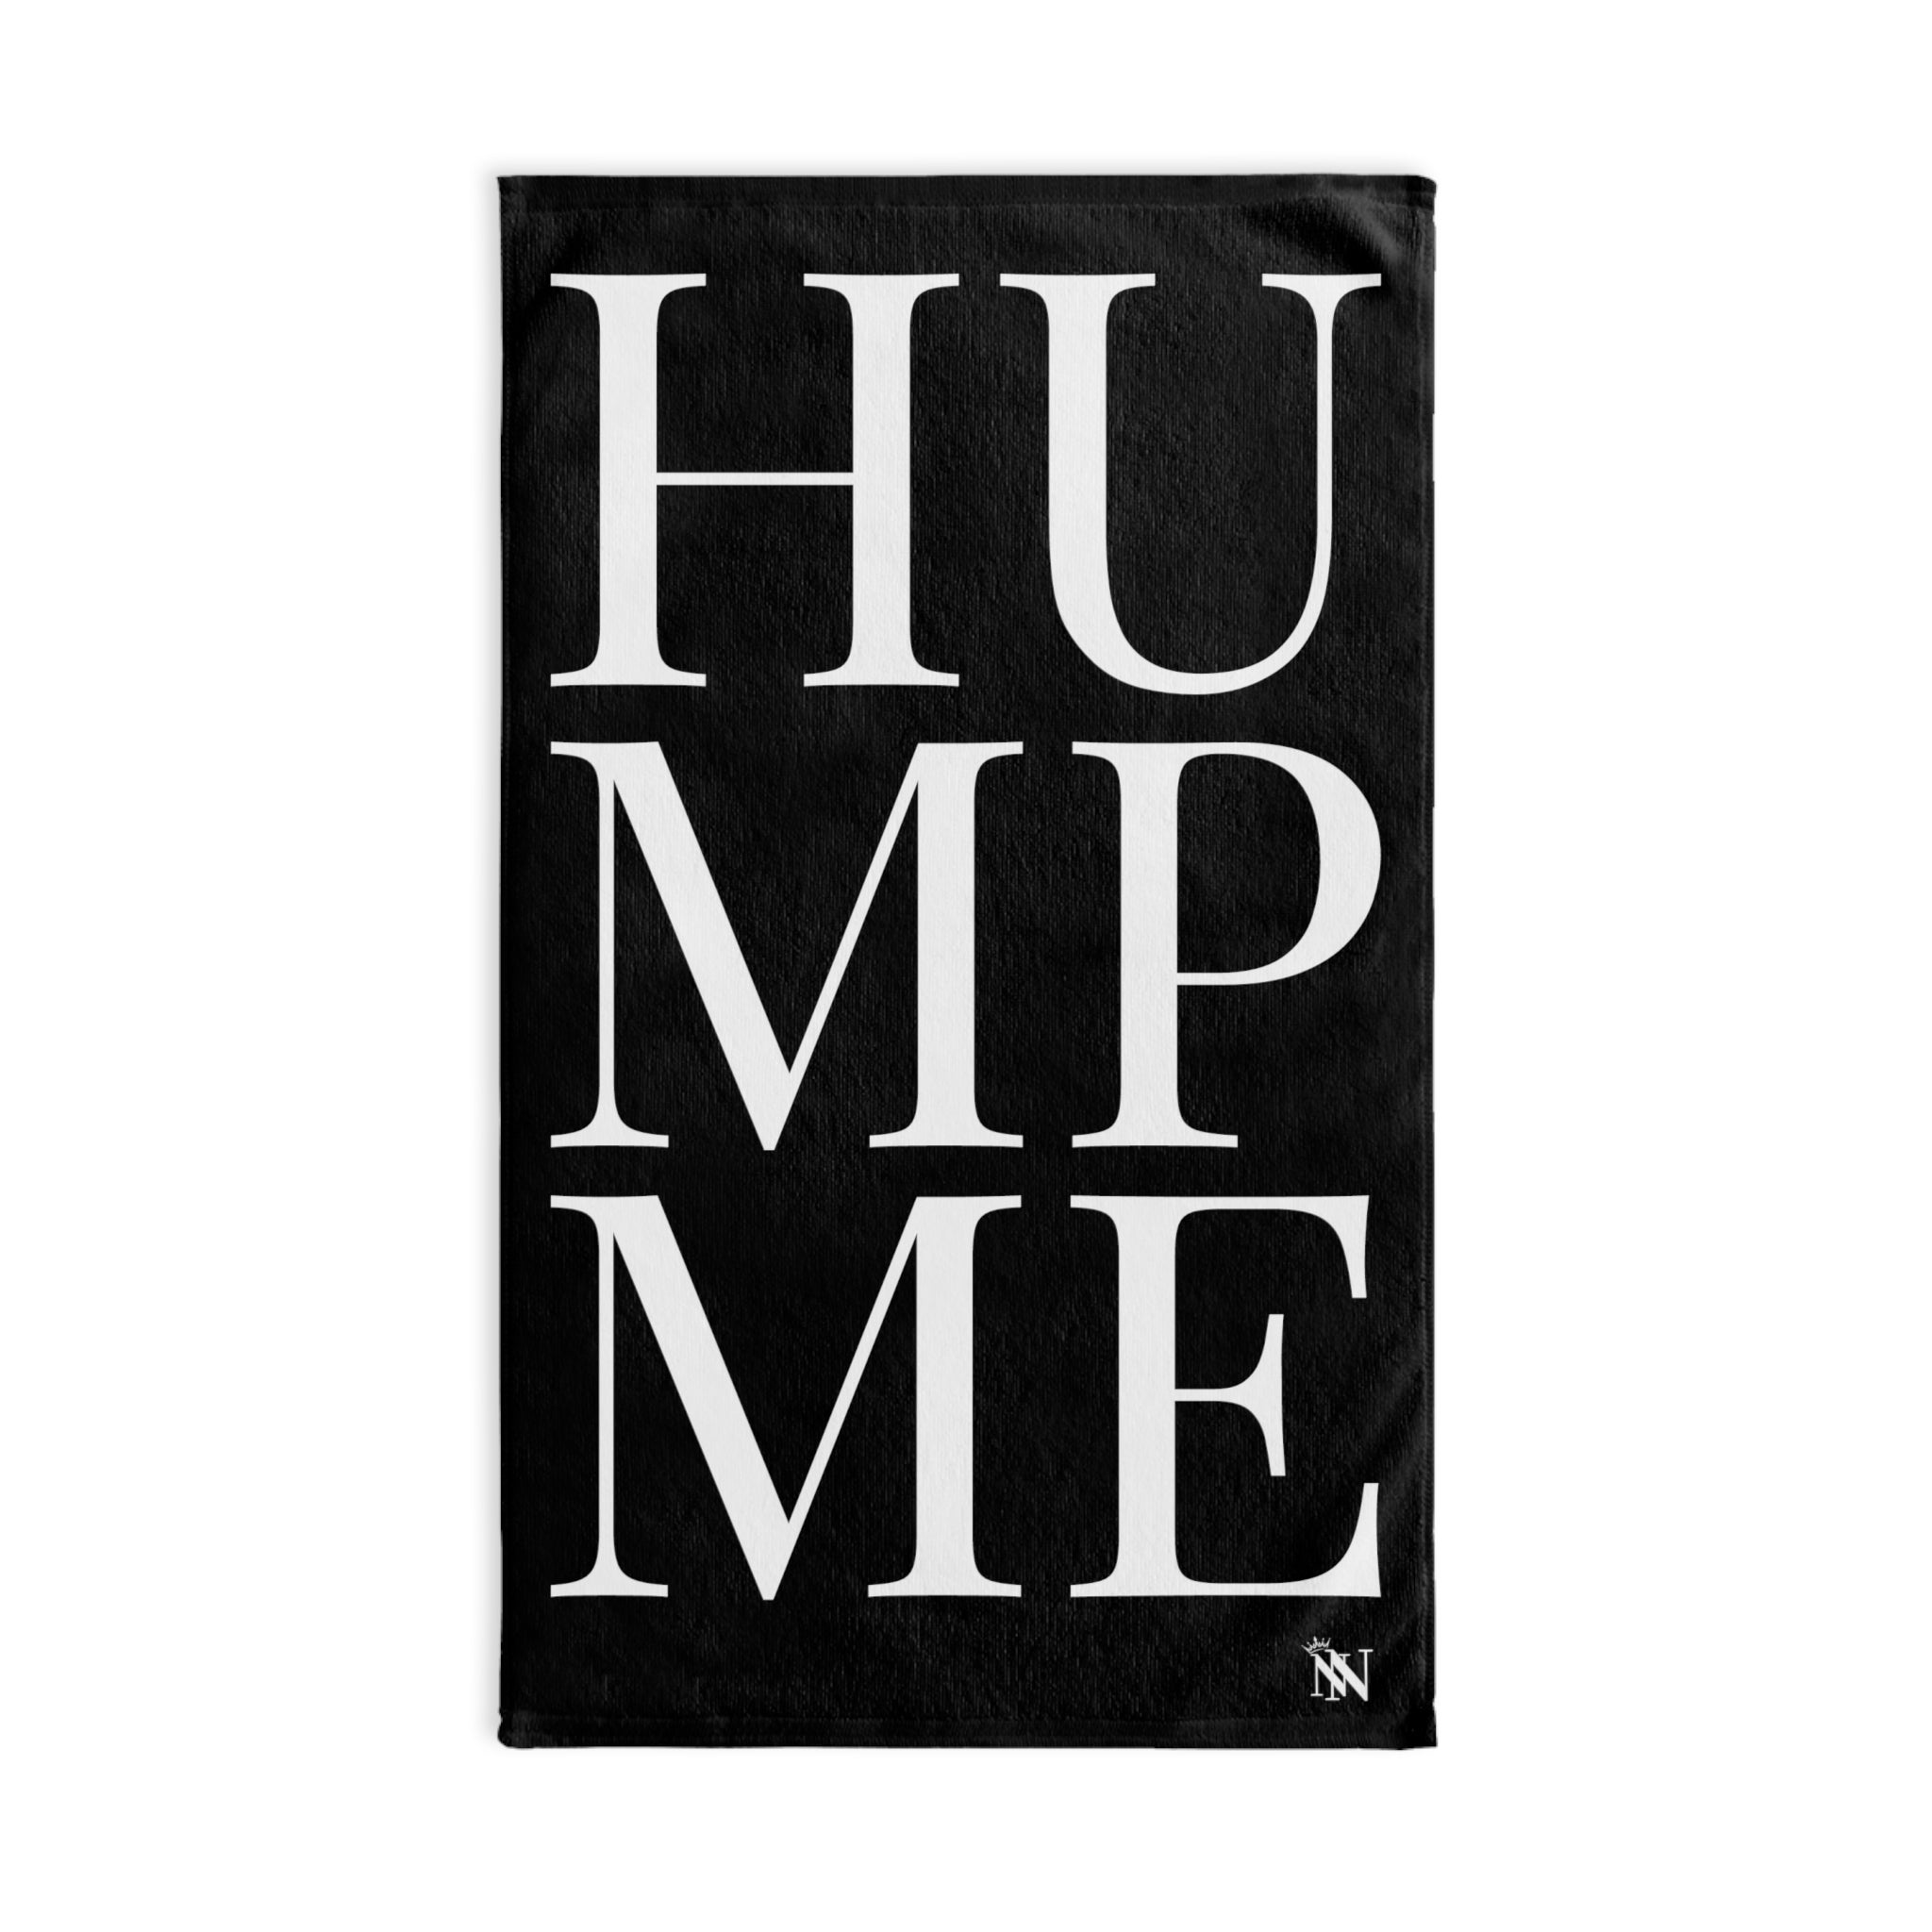 Hump Me White Black | Sexy Gifts for Boyfriend, Funny Towel Romantic Gift for Wedding Couple Fiance First Year 2nd Anniversary Valentines, Party Gag Gifts, Joke Humor Cloth for Husband Men BF NECTAR NAPKINS